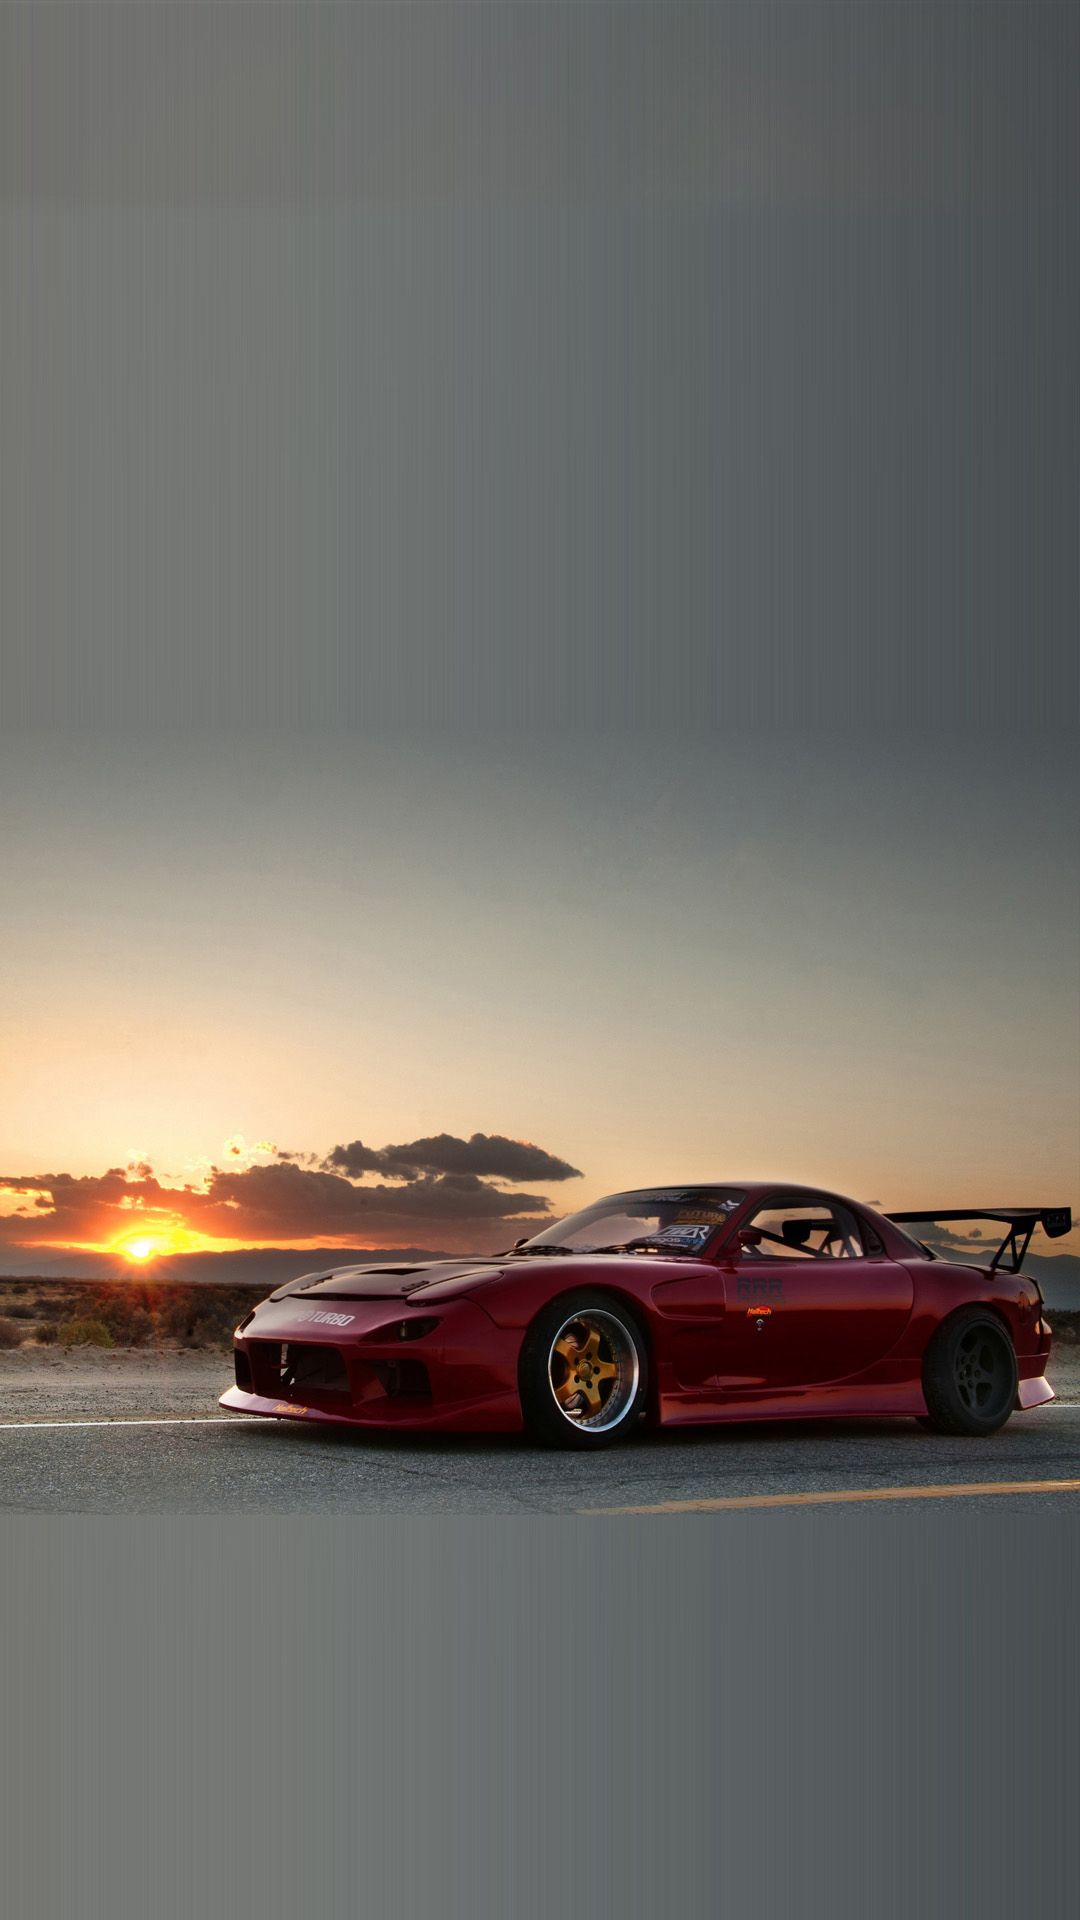 Cars Mazda Rx7 Sunset Android Wallpaper HD 4k